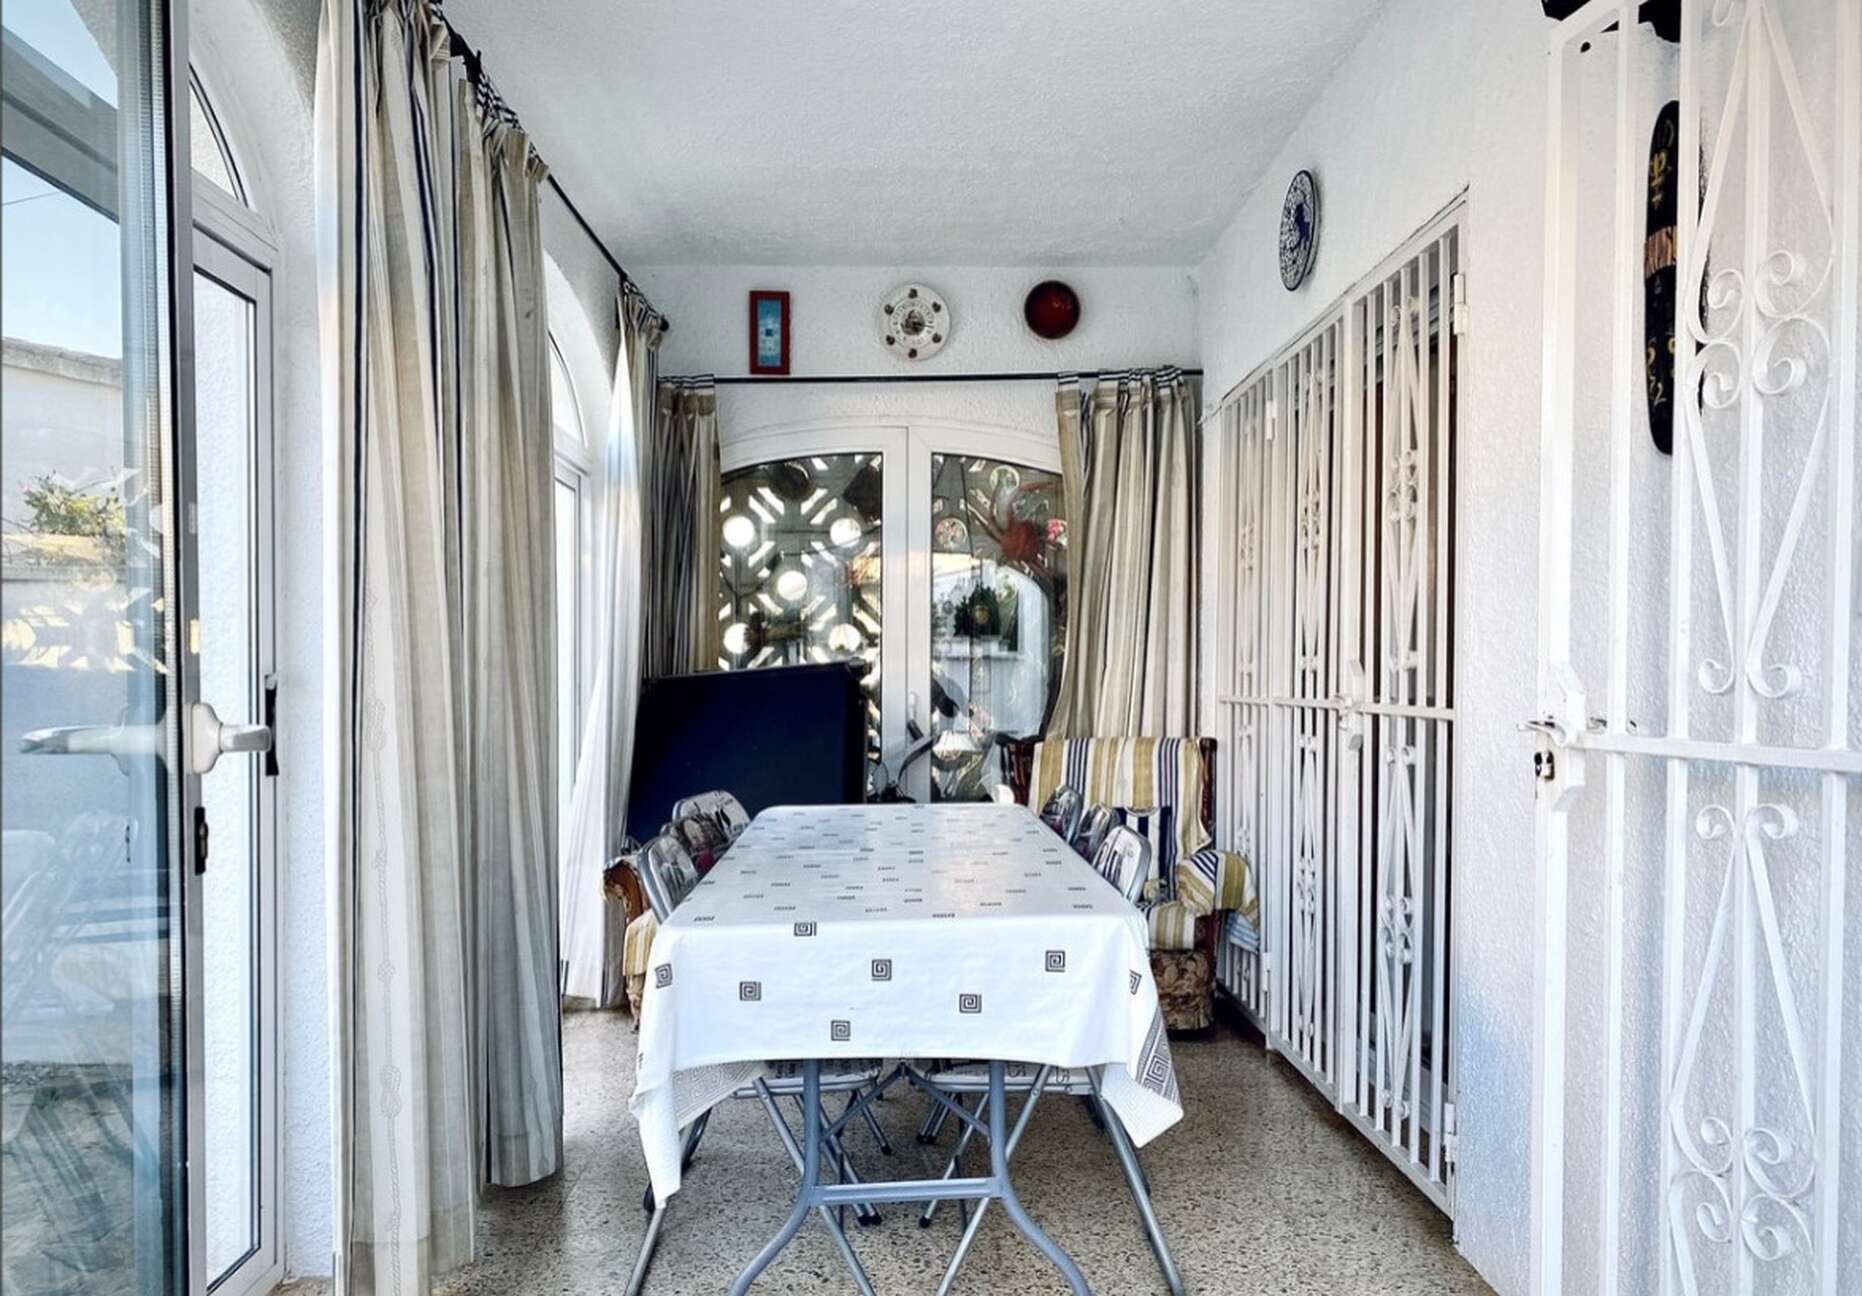 House for sale in Empuriabrava, 200m from the beach.